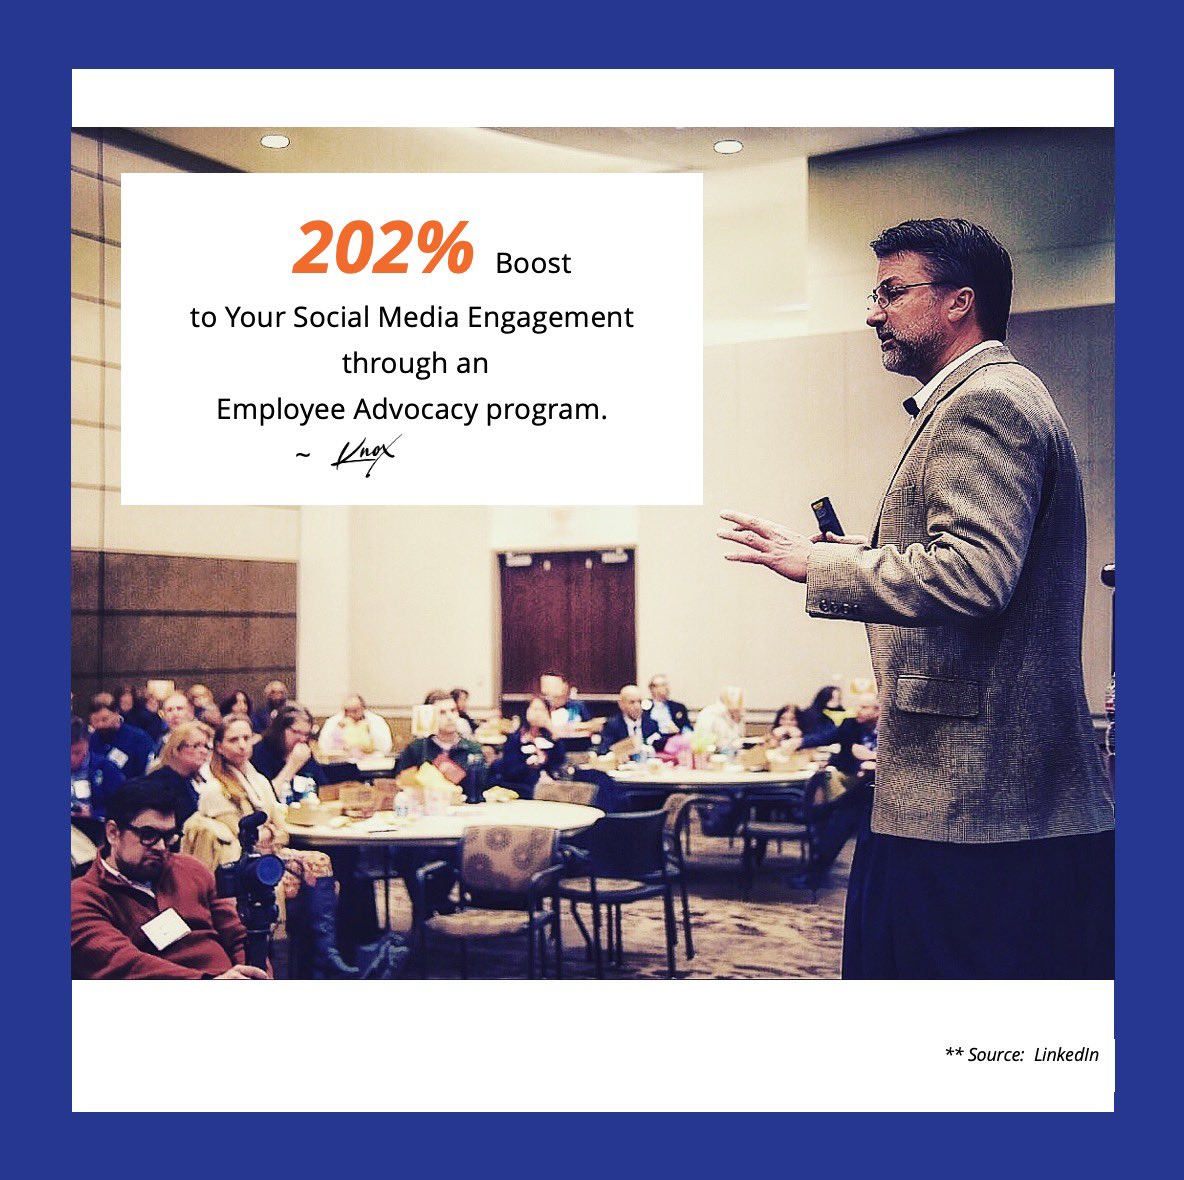 Boost engagement by 202% with engaged employees. Employee advocacy programs can drive real results for your brand. #Engagement #EmployeeAdvocacy #socialmedia #marketing